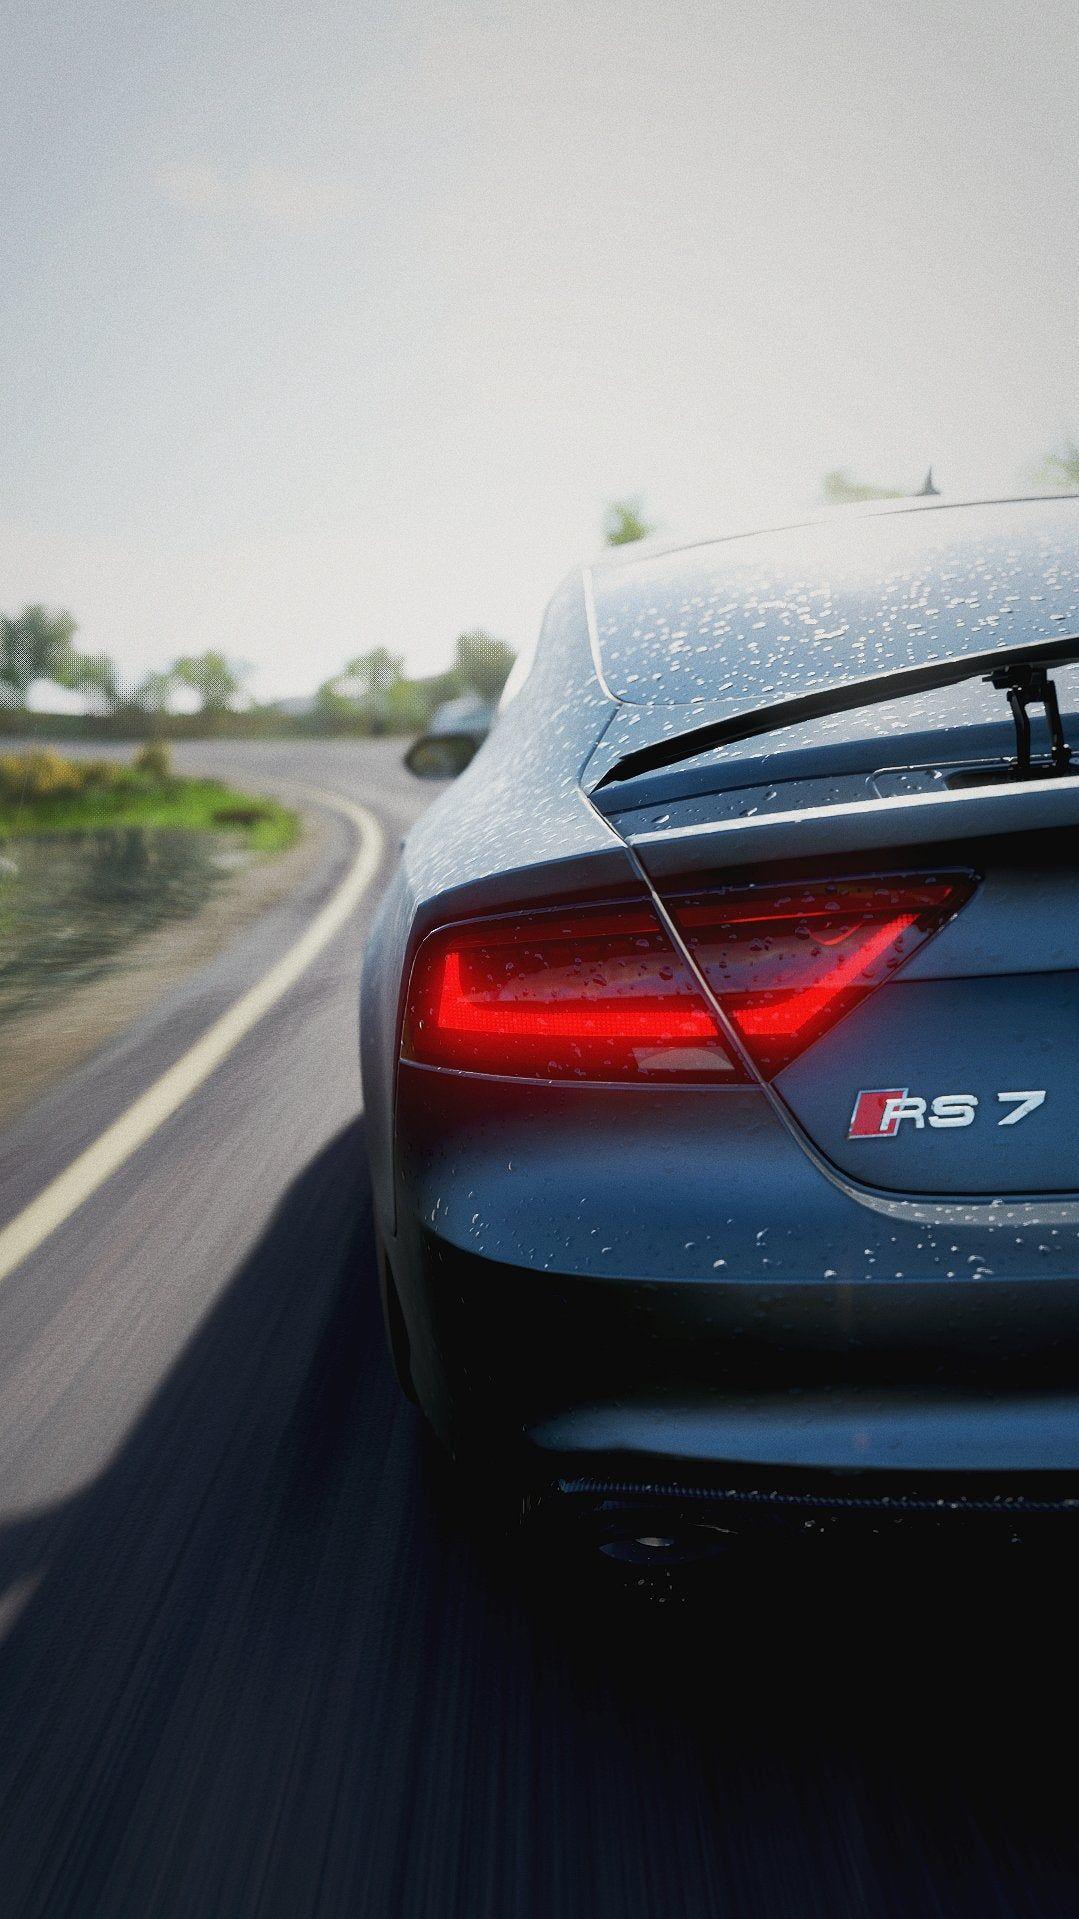 Audi Rs7 wallpaper by xhanirm  Download on ZEDGE  24bf